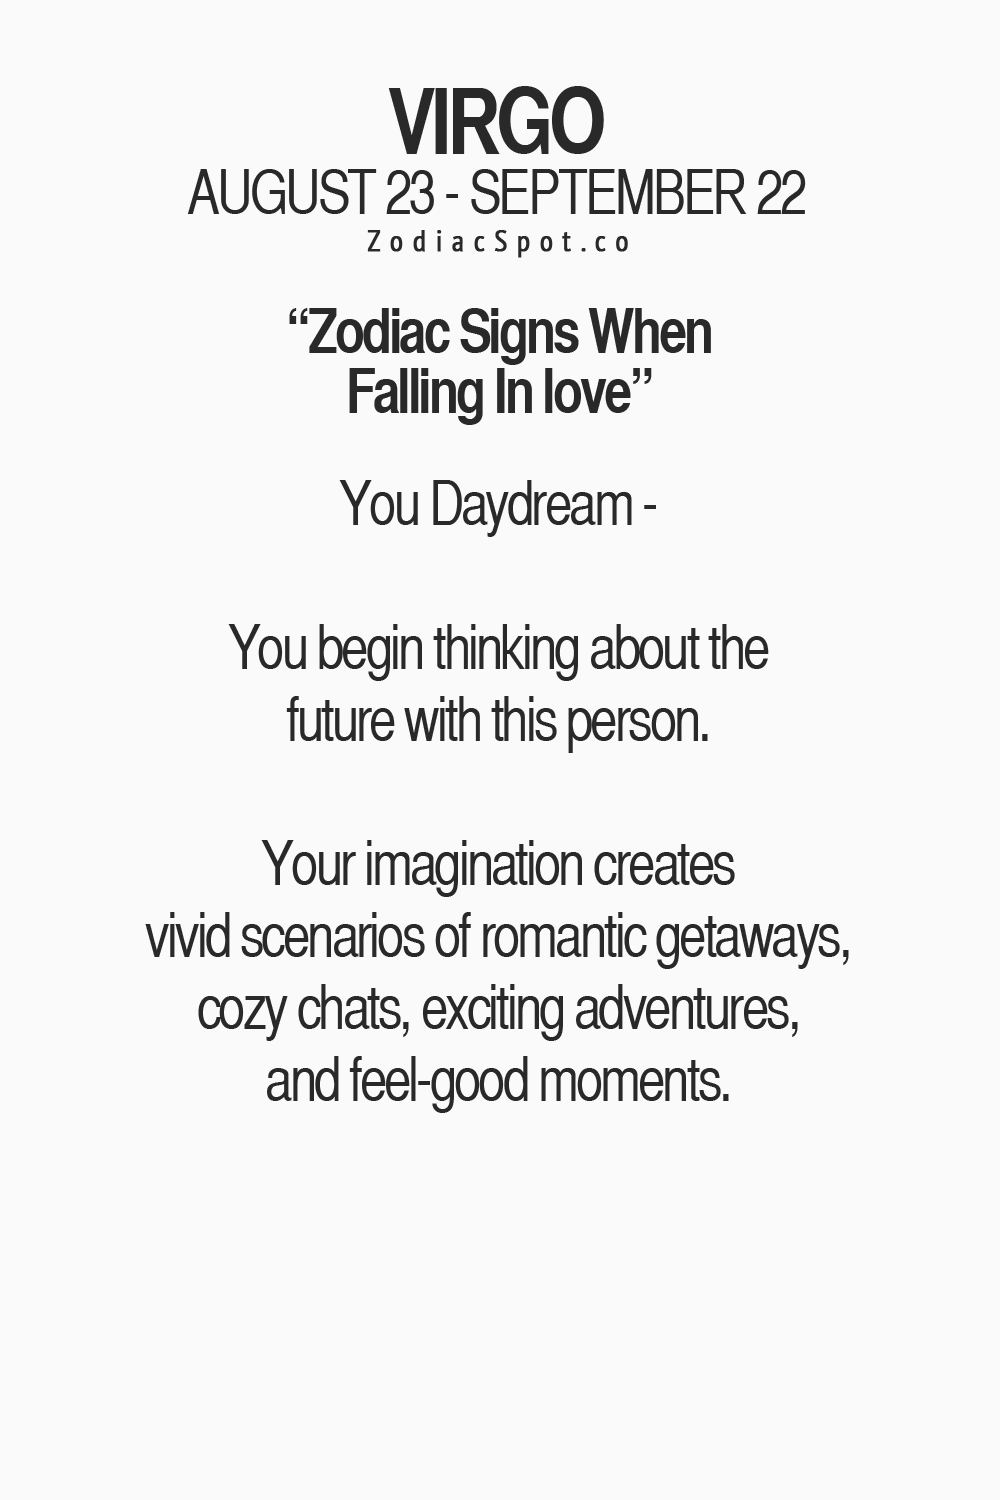 Virgo Season - zodiacspot: How would your sign react? See here